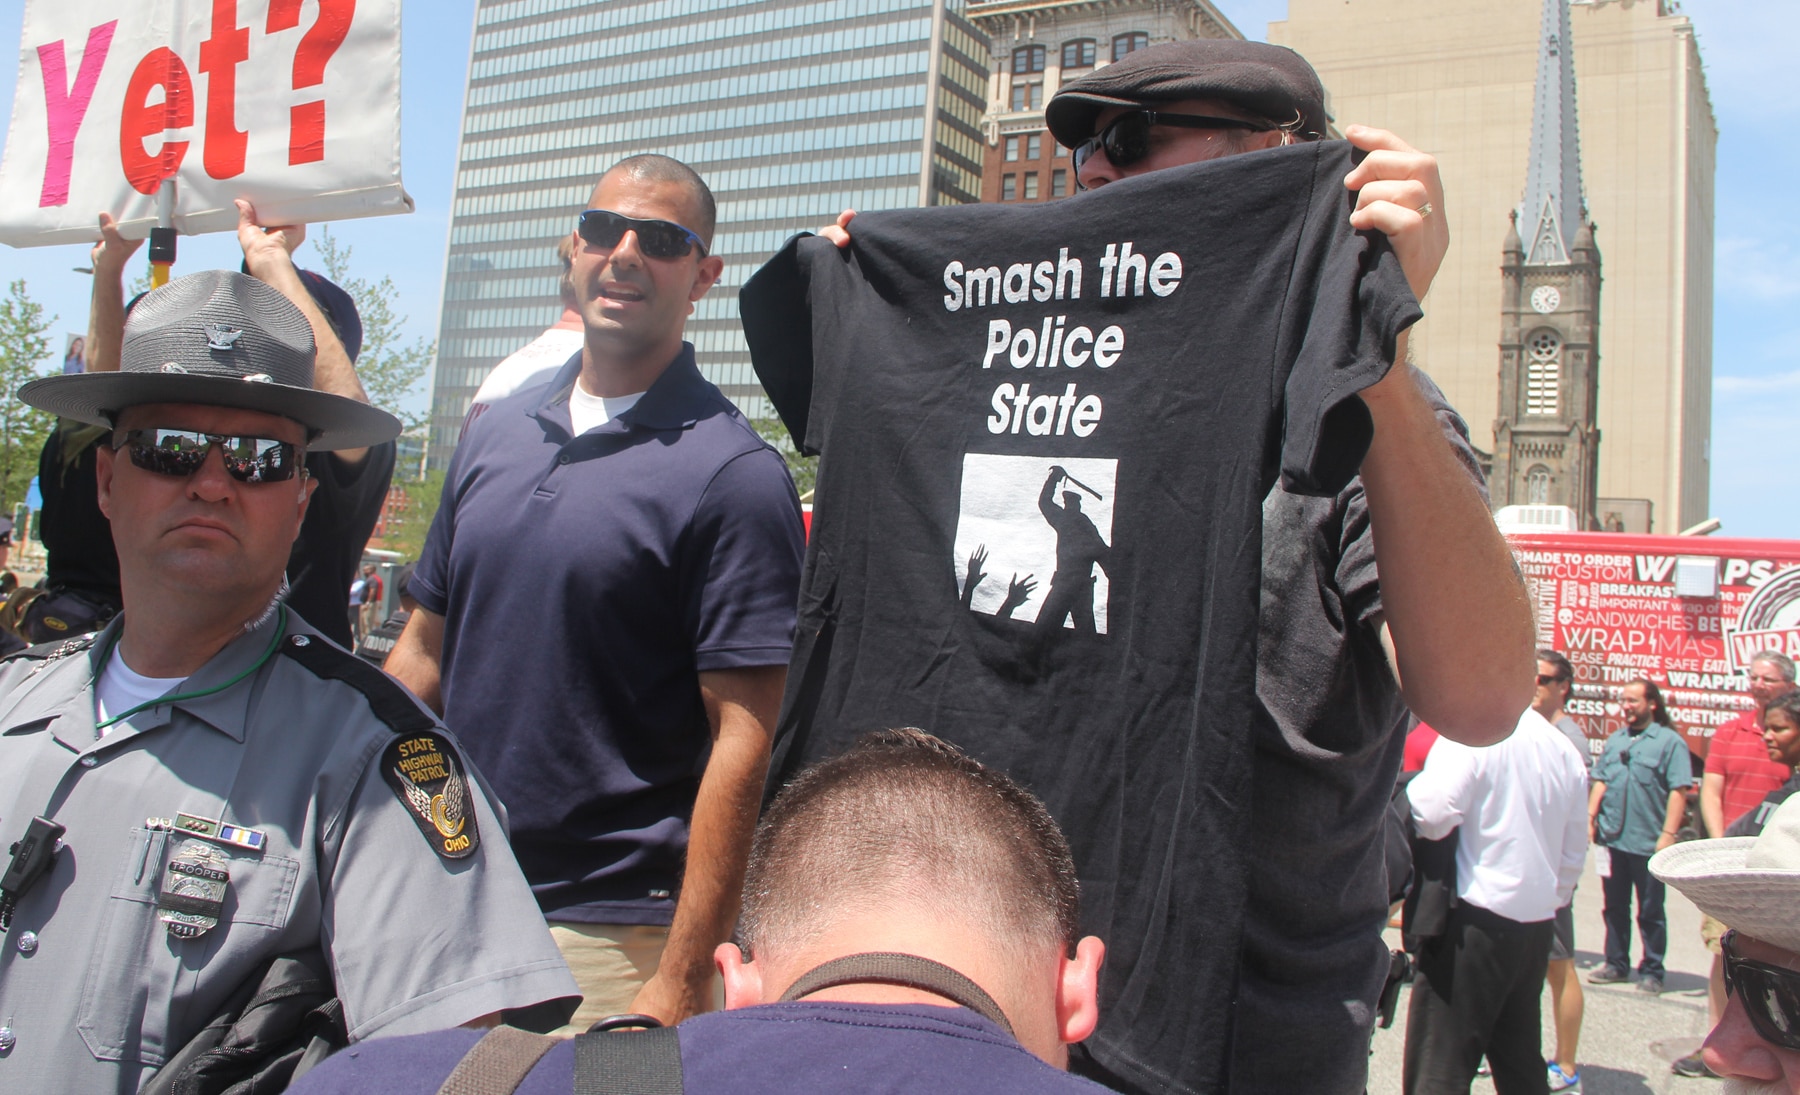 Neat T-shirt, but not sure what police state he was in.